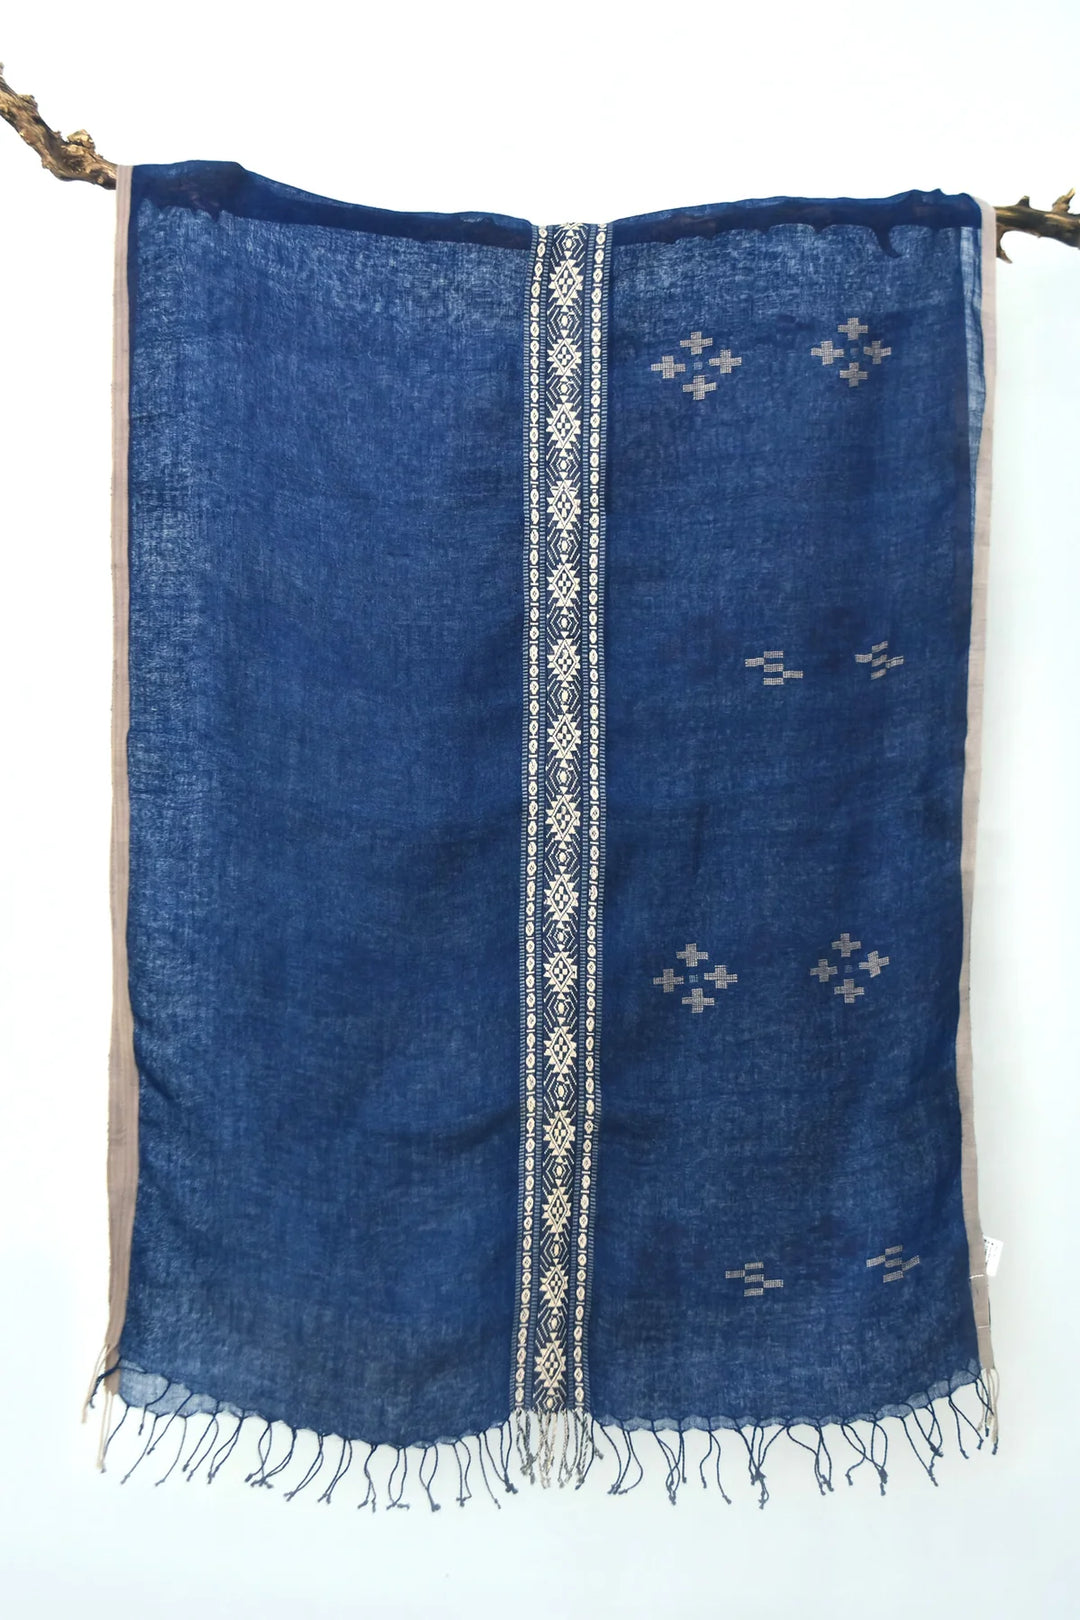 Blue Linen Stole with Sea-Inspired Elegance | Sonority Handwoven Linen Stole - Blue